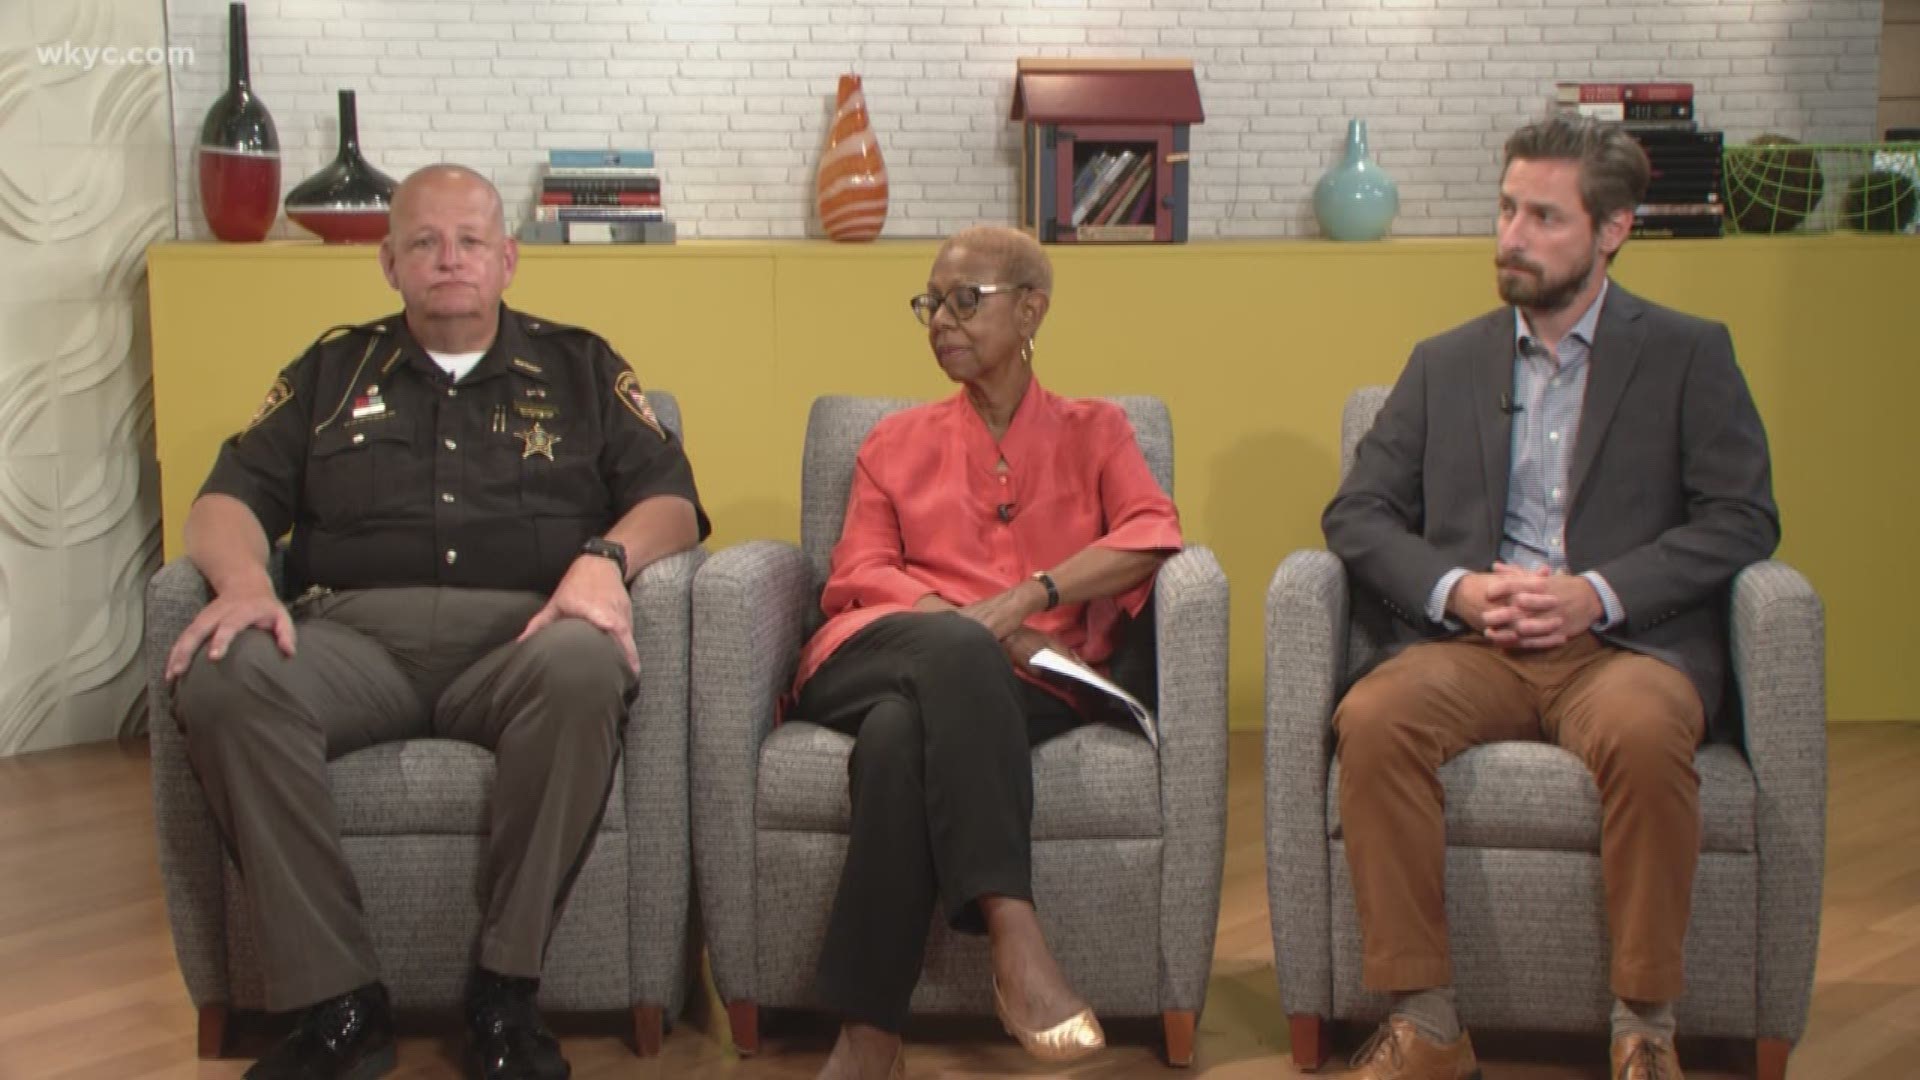 Panel of experts discusses shootings and their impact